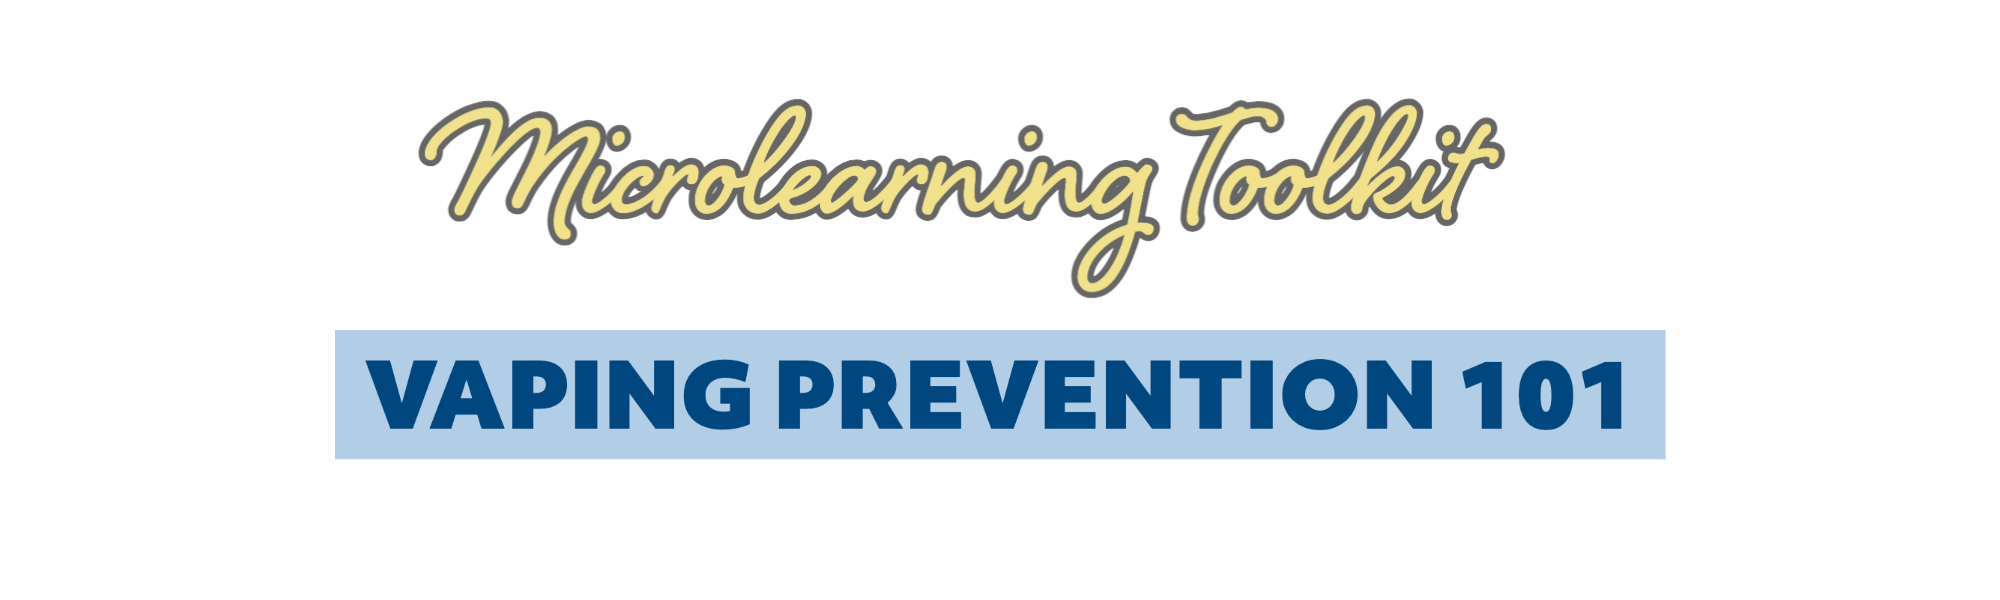 Microlearning Toolkit: Vaping Prevention 101